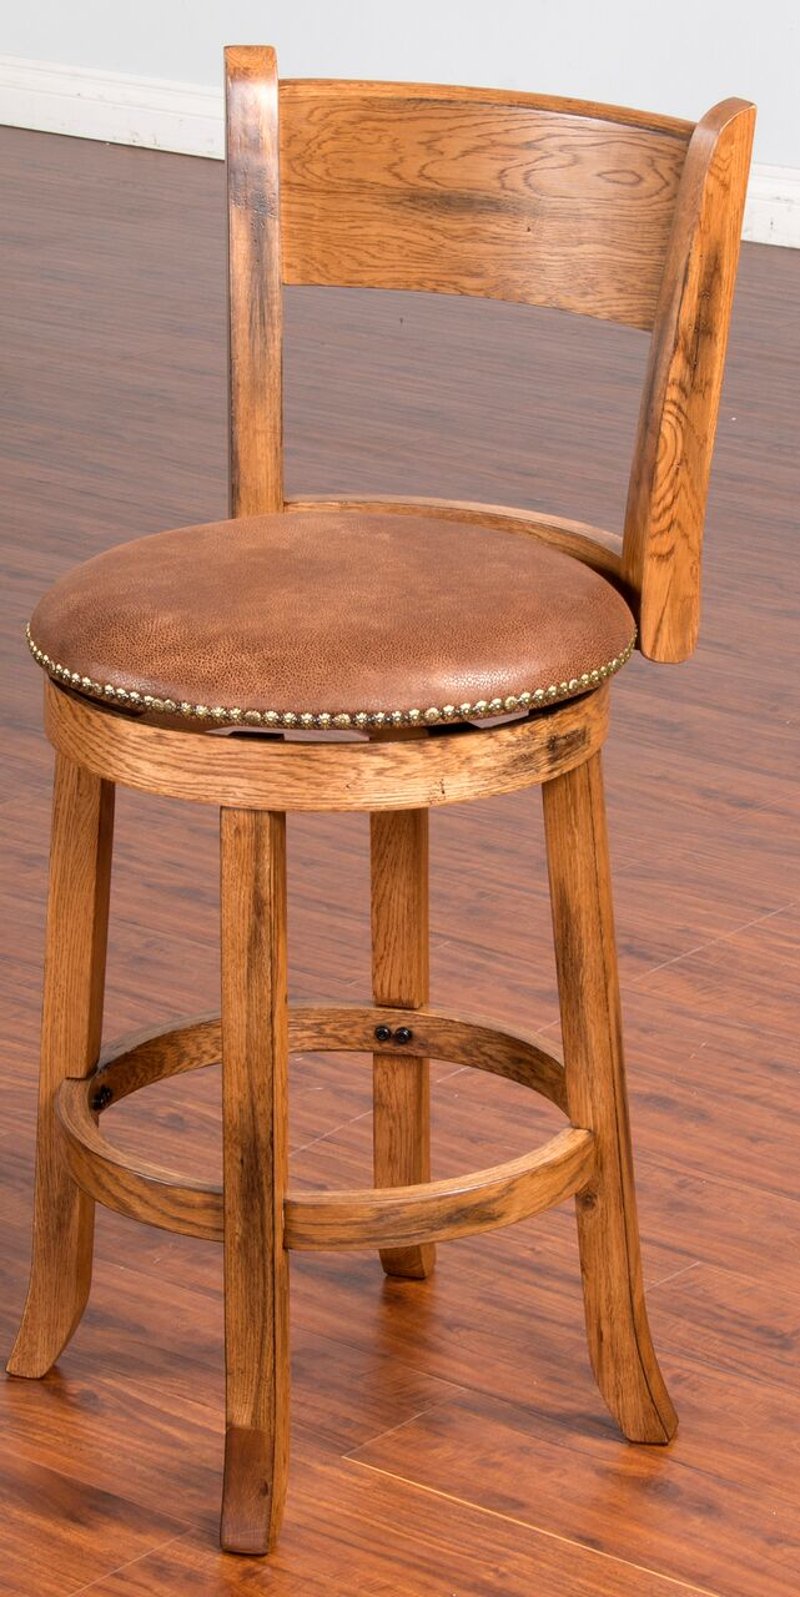 24 Inch Swivel Counter Height Stool - Sedona | RC Willey ...